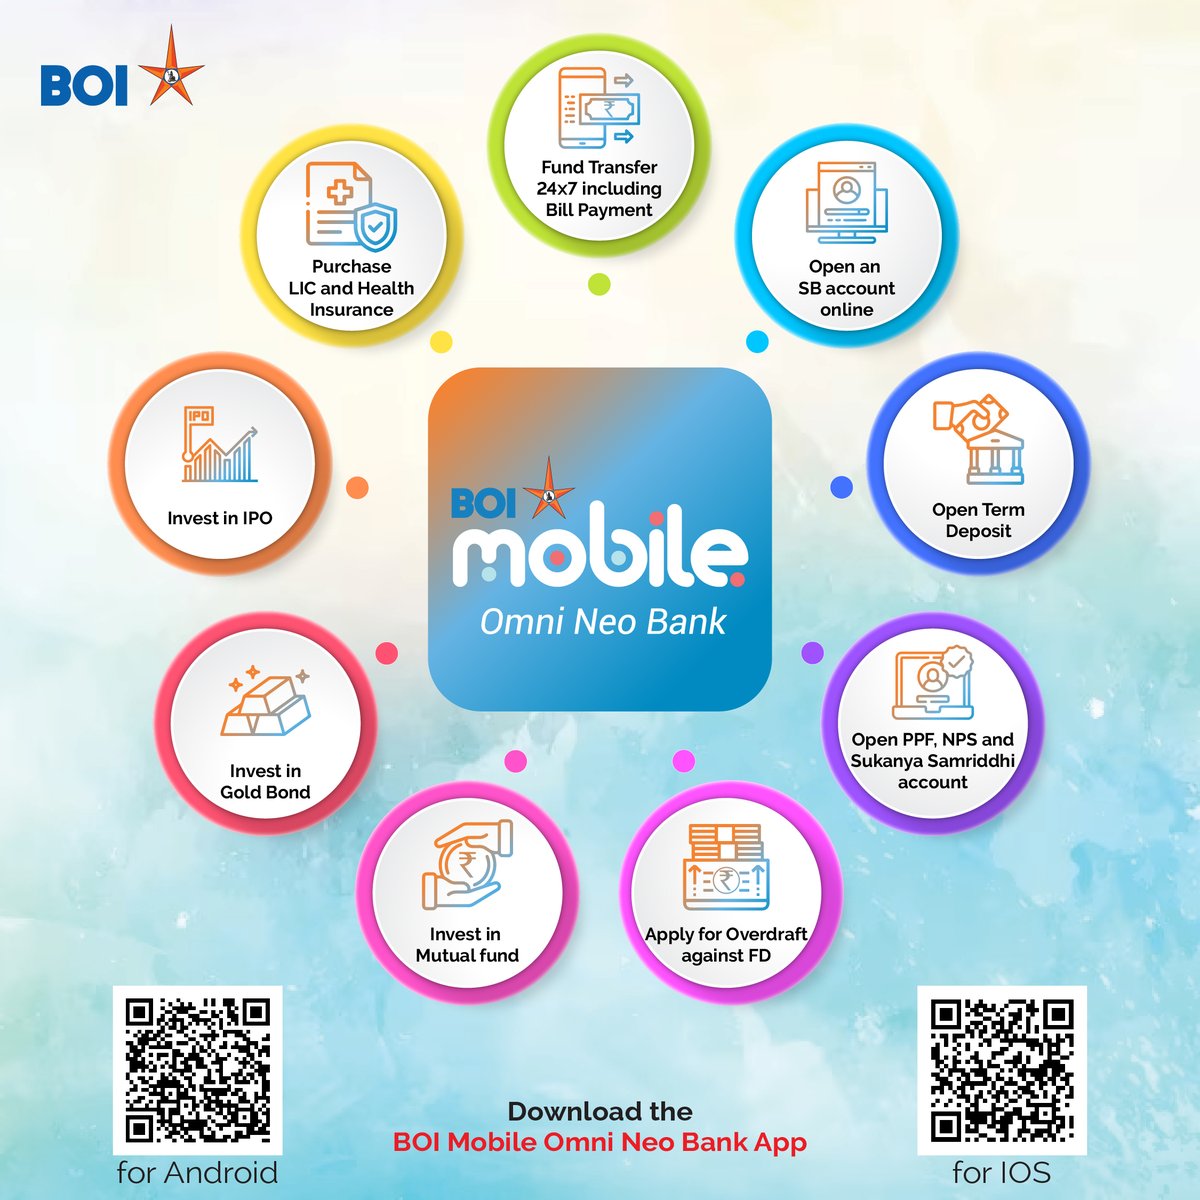 Instant Banking, Effortless Living! Download the BOI Mobile Omni Neo Bank App to enjoy features like account management, quick payments, transaction history, and more. No queues, just convenience! Download the app now: Google Play Store: bit.ly/44Mdt2Y App store:…